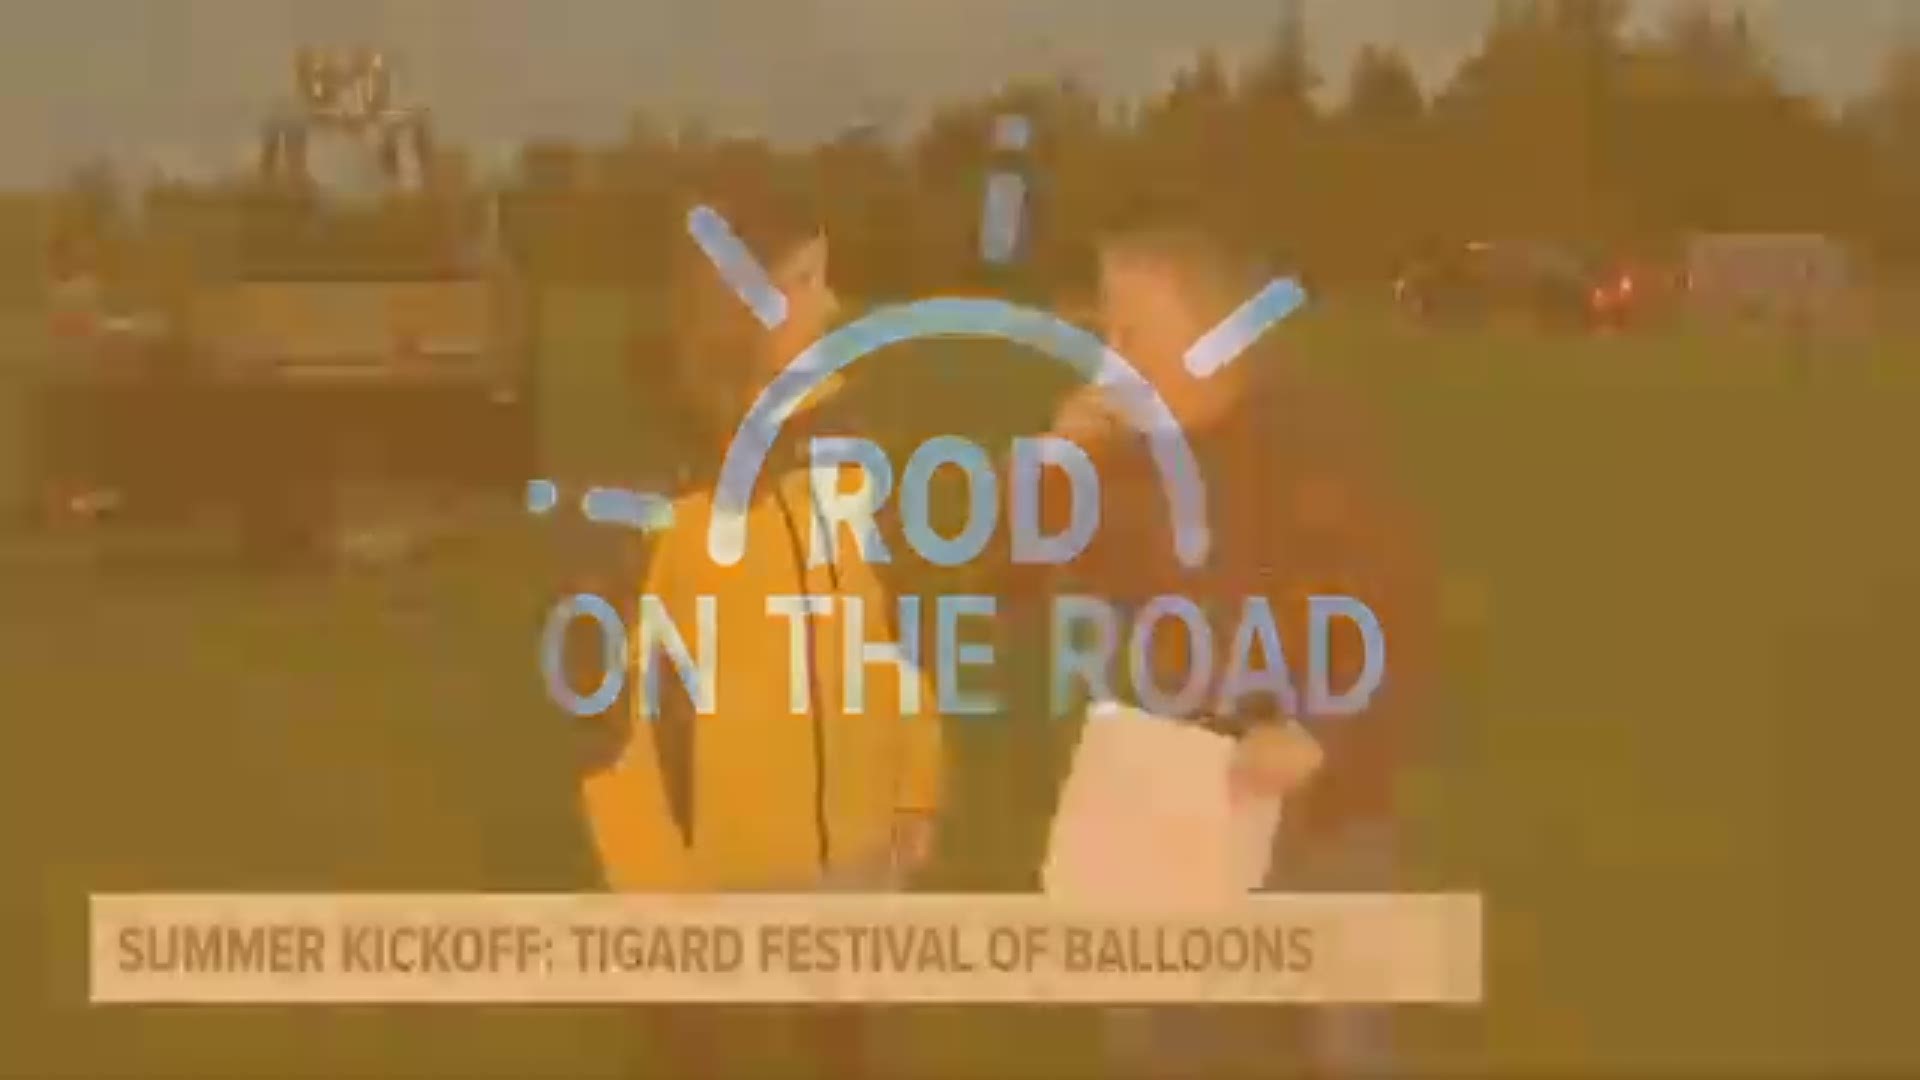 KGW meteorologist Rod Hill and Sunrise anchor Nina Mehlhaf spend a morning at the Tigard Festival of Balloons.